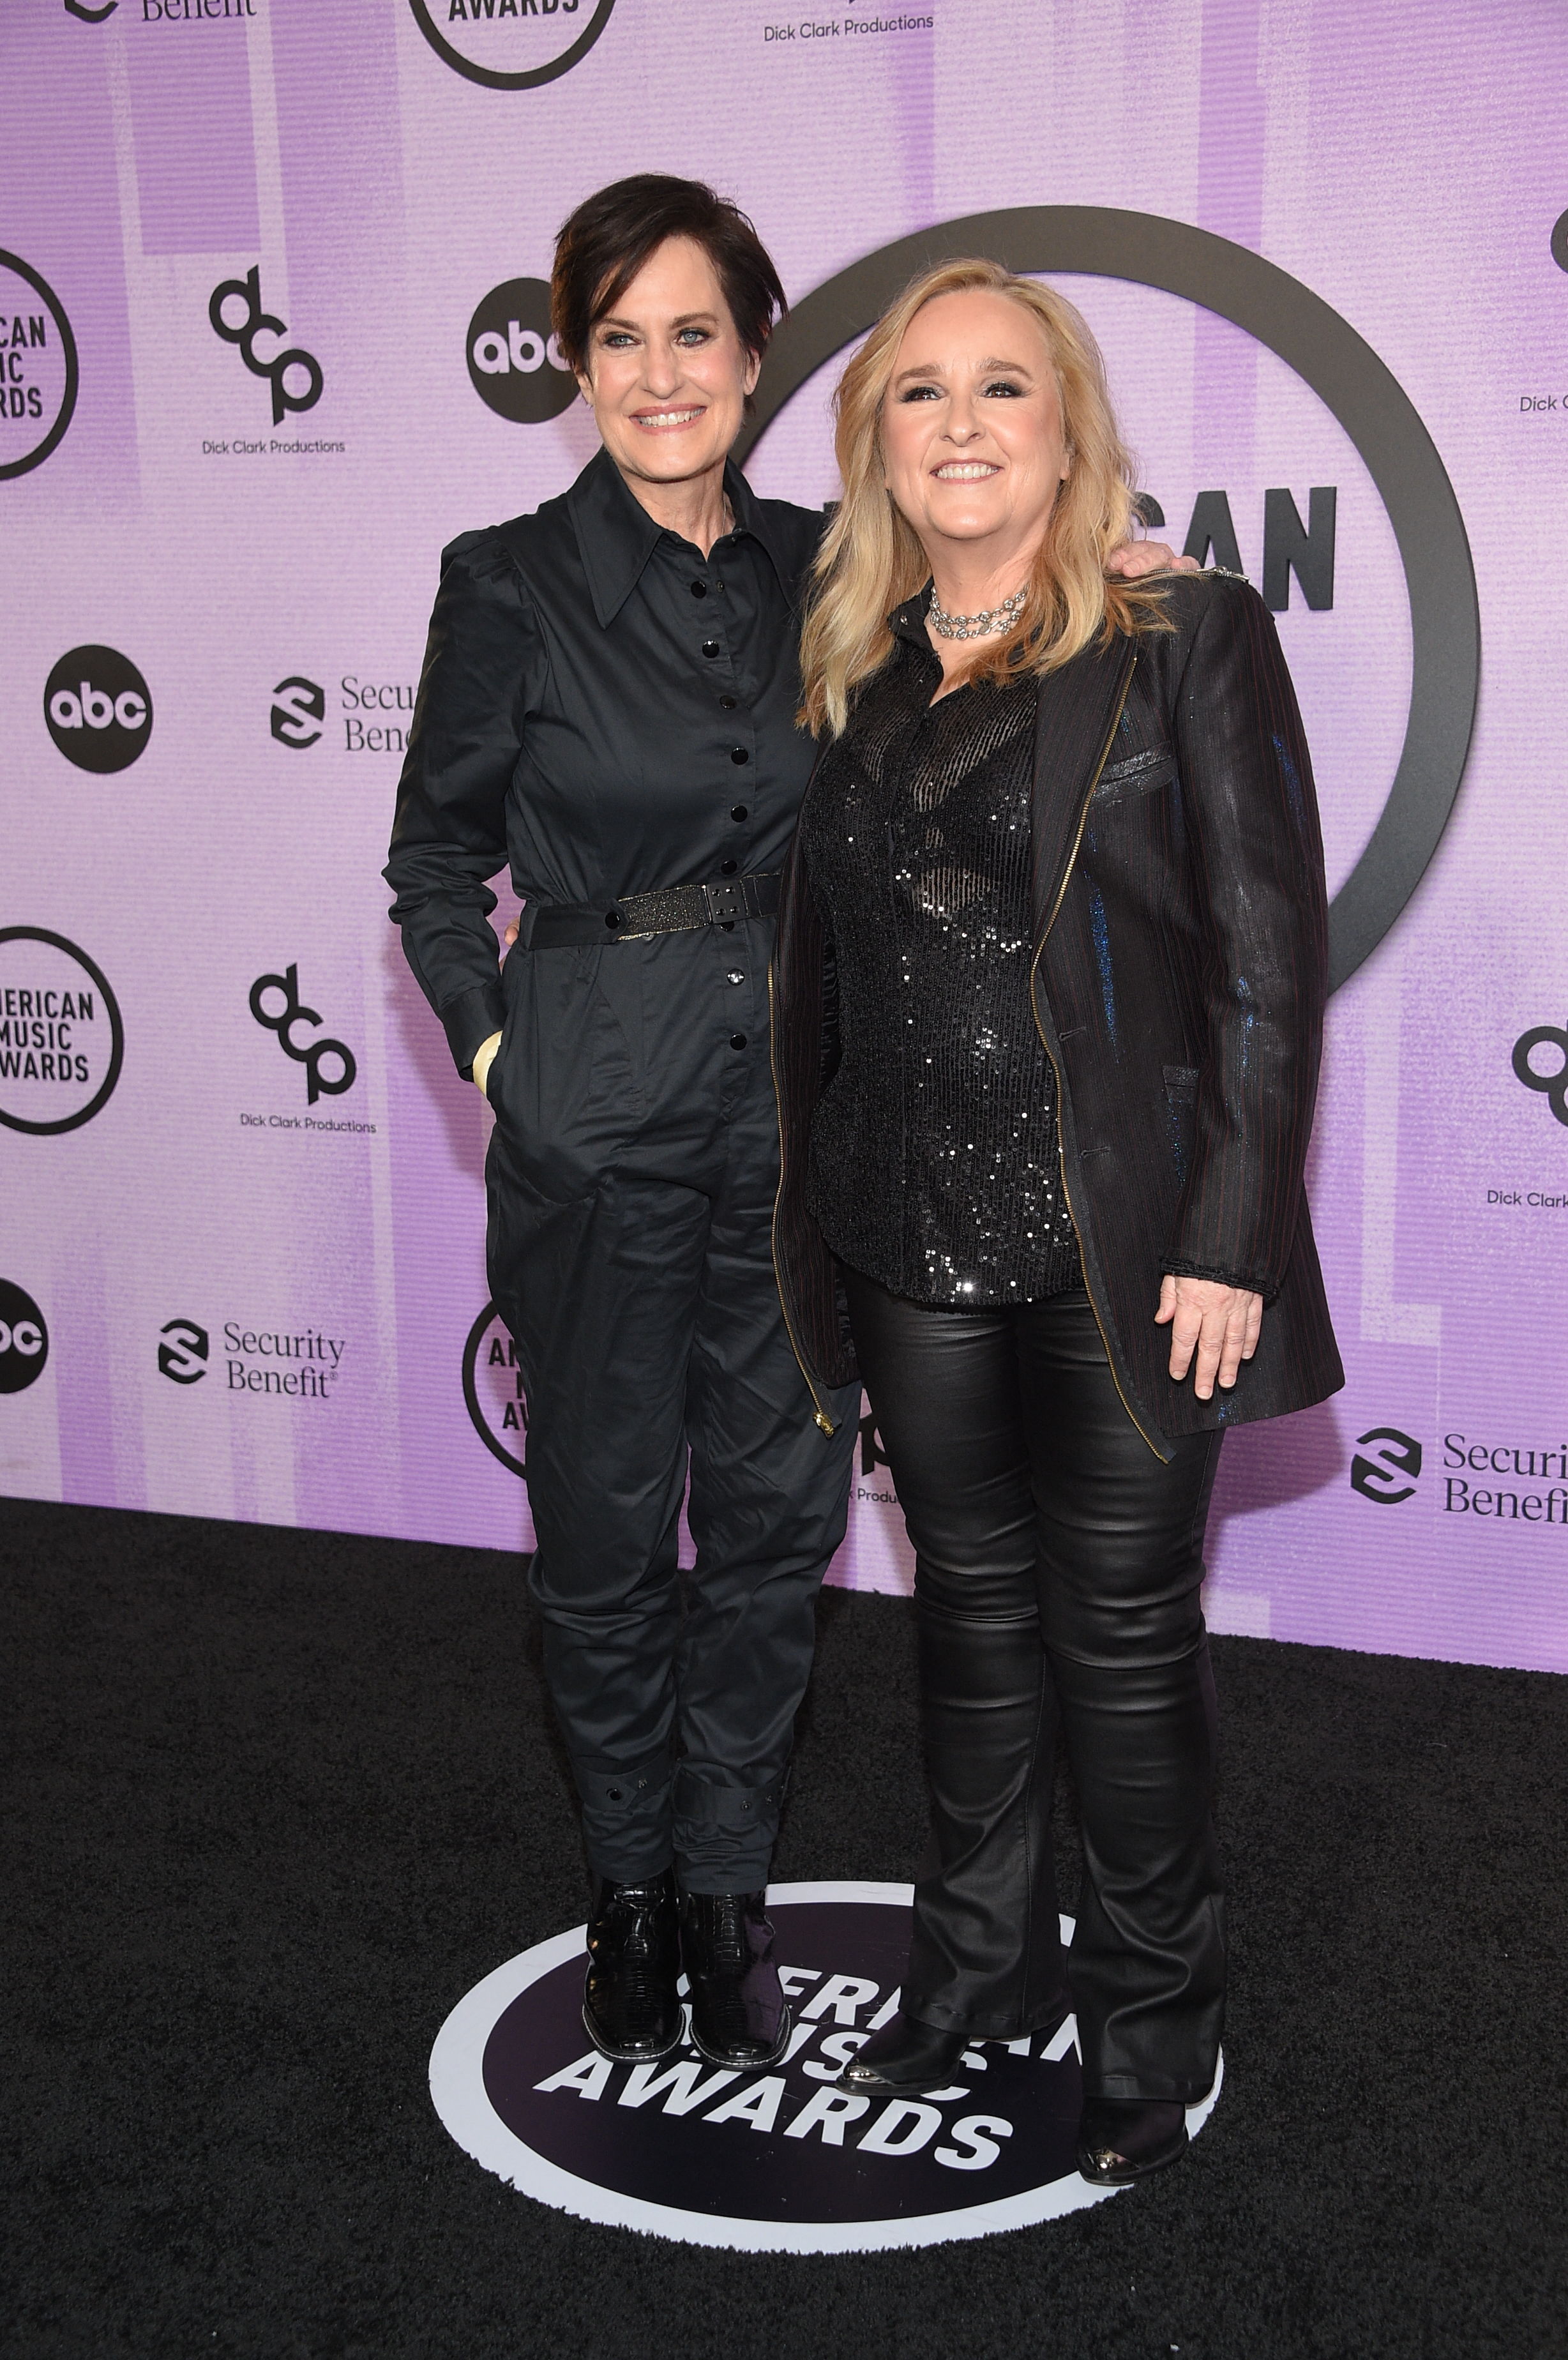 Linda Wallem and Melissa Etheridge arrive for the 50th Annual American Music Awards in Los Angeles, California, on November 20, 2022. | Source: Getty Images